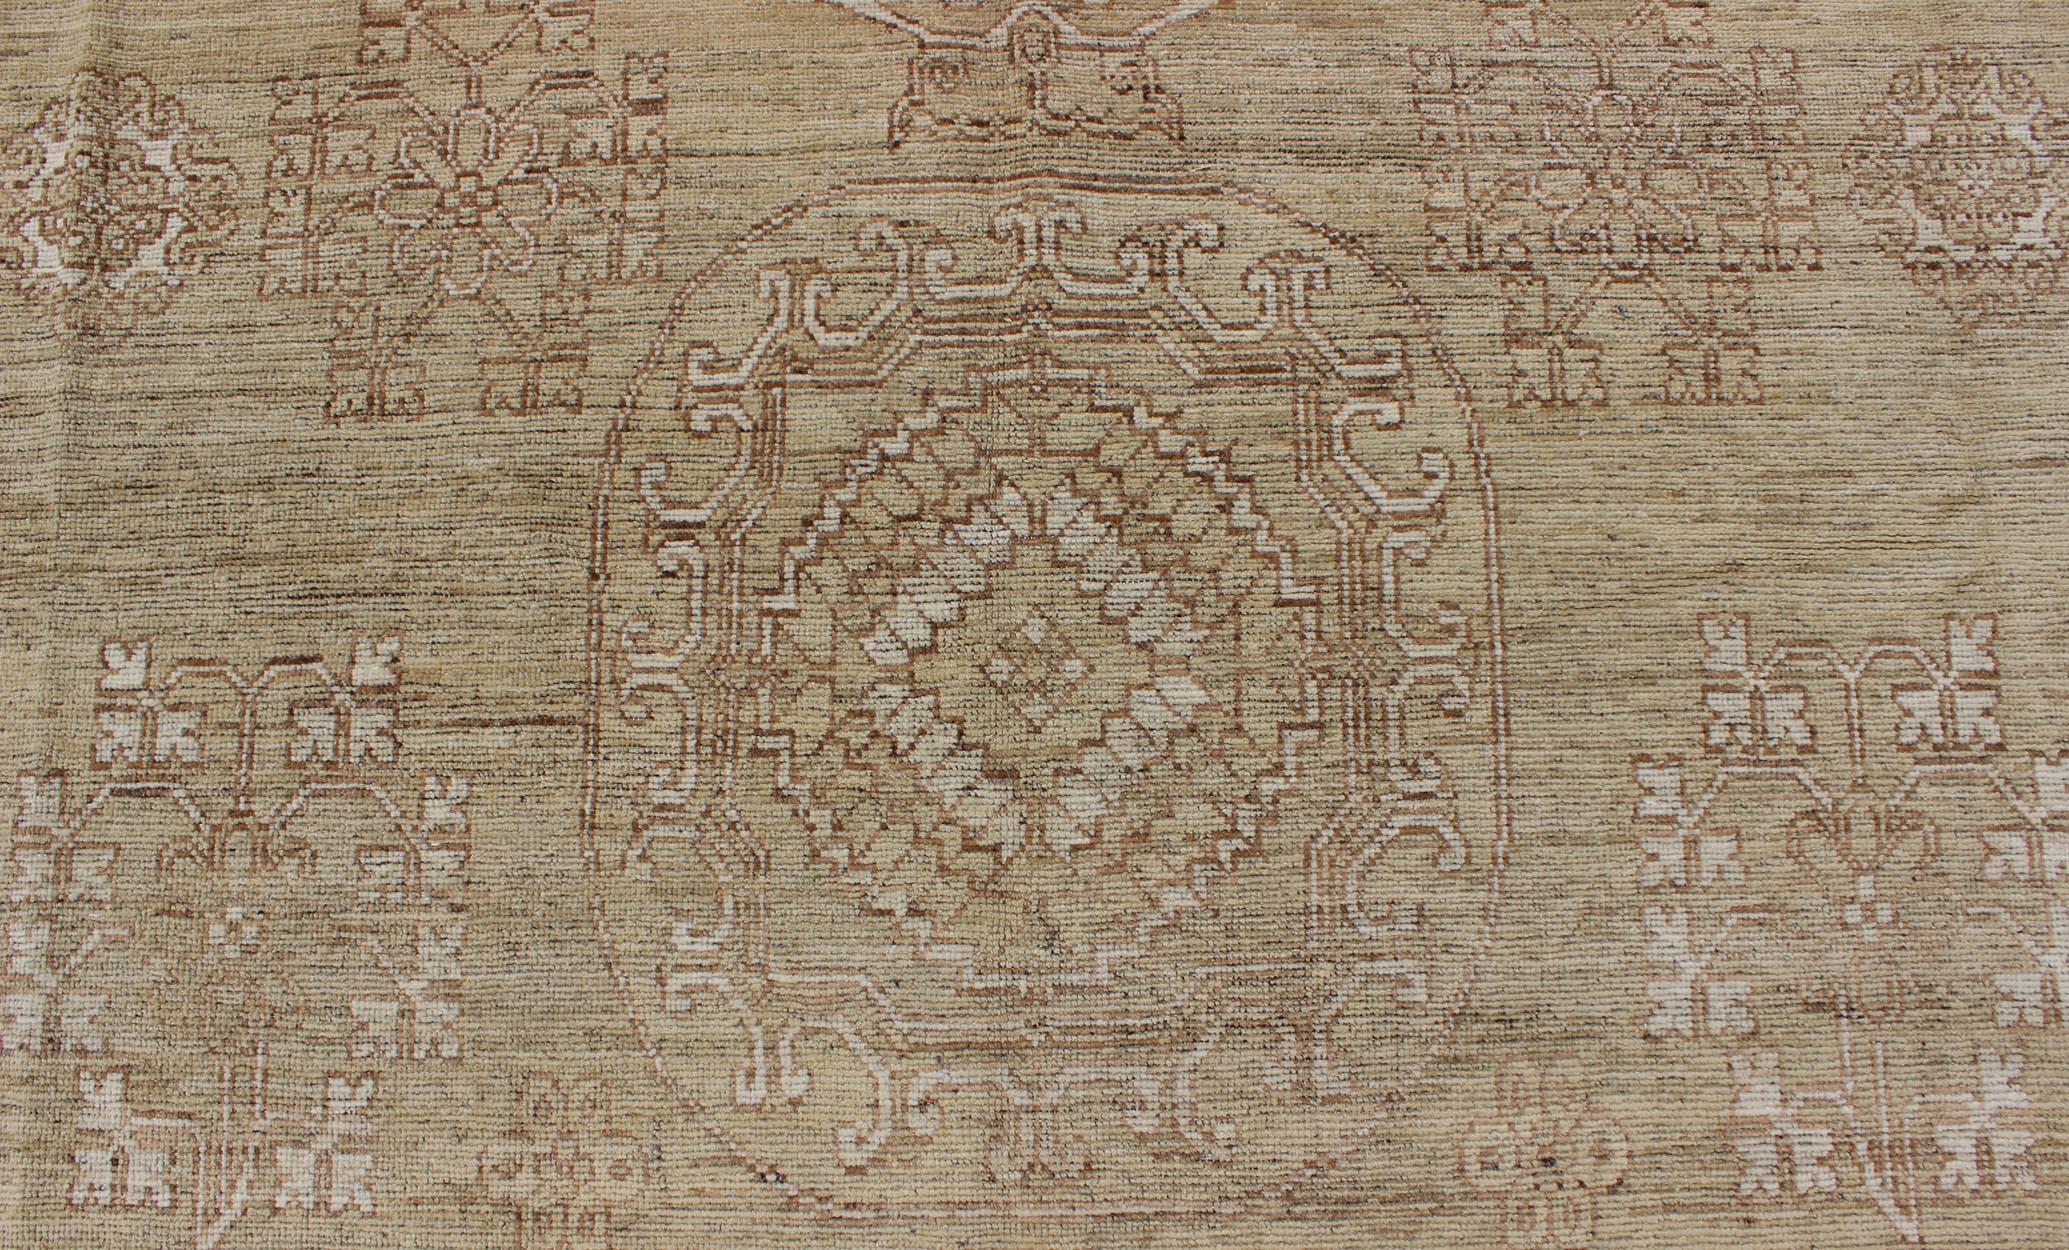 Hand-Knotted Khotan Design Rug with All-Over Geometric Pattern in Light Brown and Green's For Sale